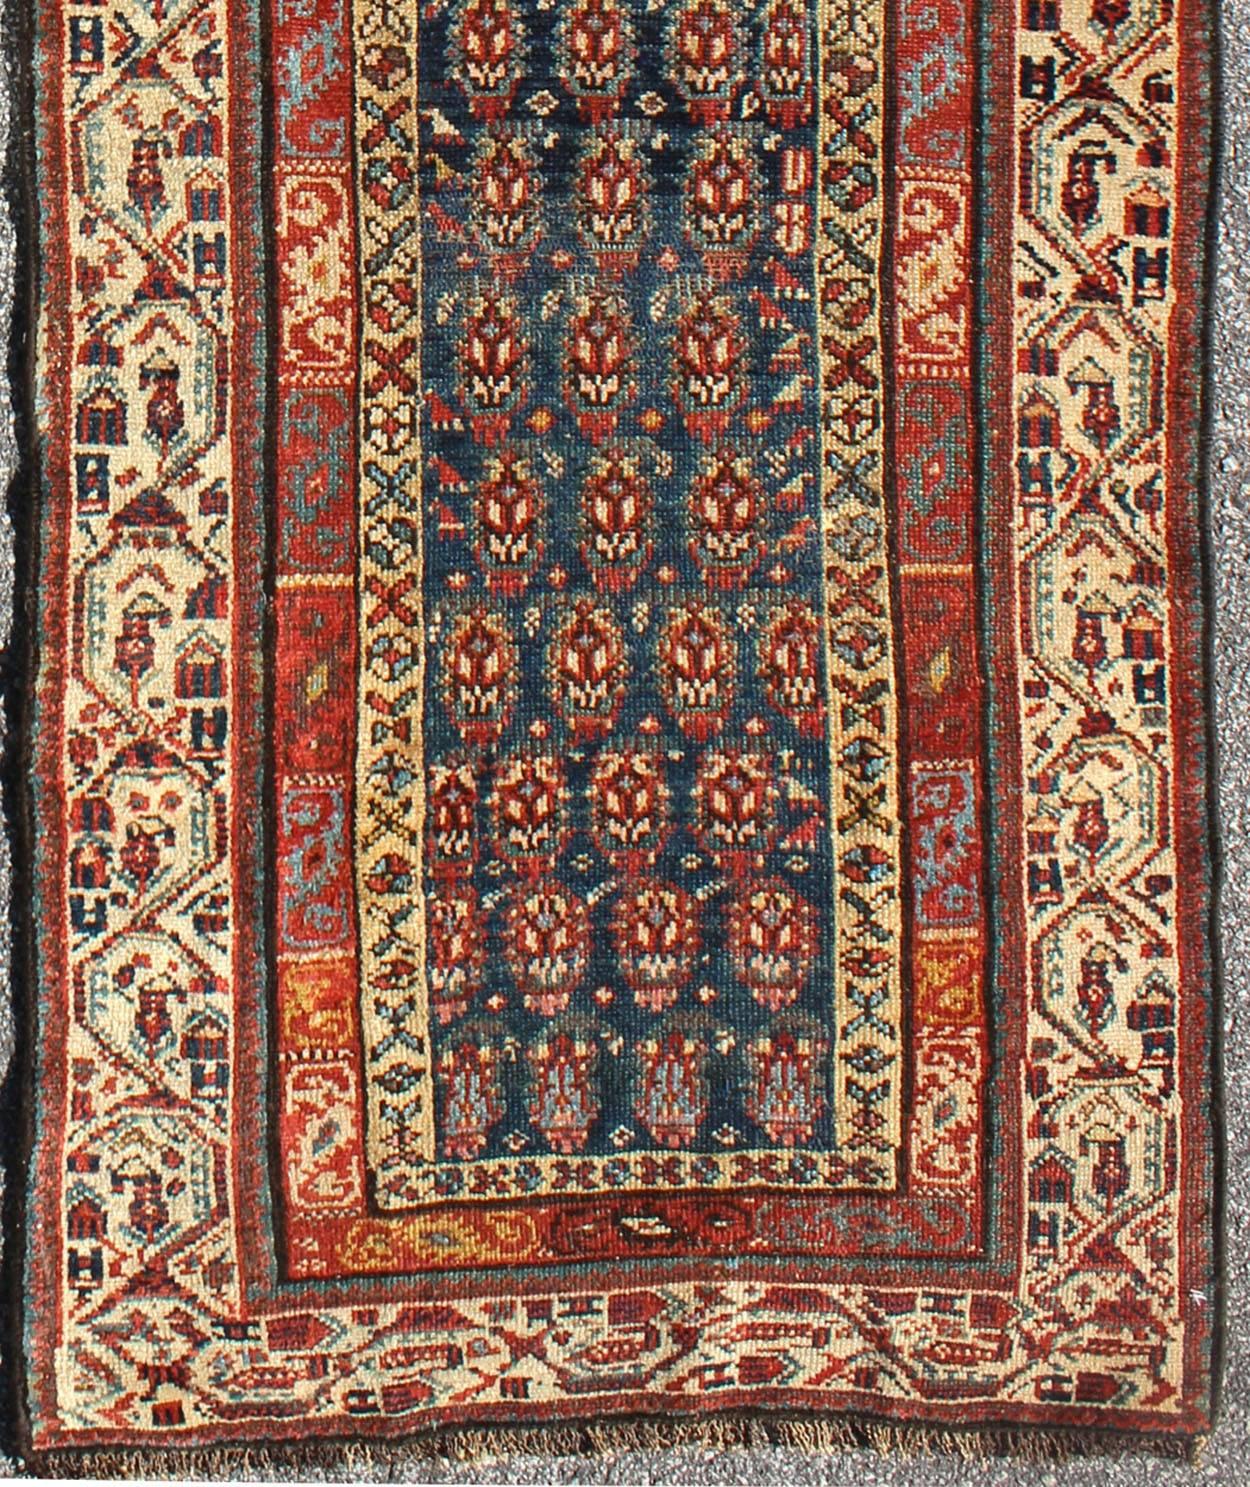 This antique runner was woven in far northwest Persia in the area bordering the Caucasus. The vibrant color and saturation of its finely drawn elements are enhanced by their placement against a deep indigo field. The main border is composed of